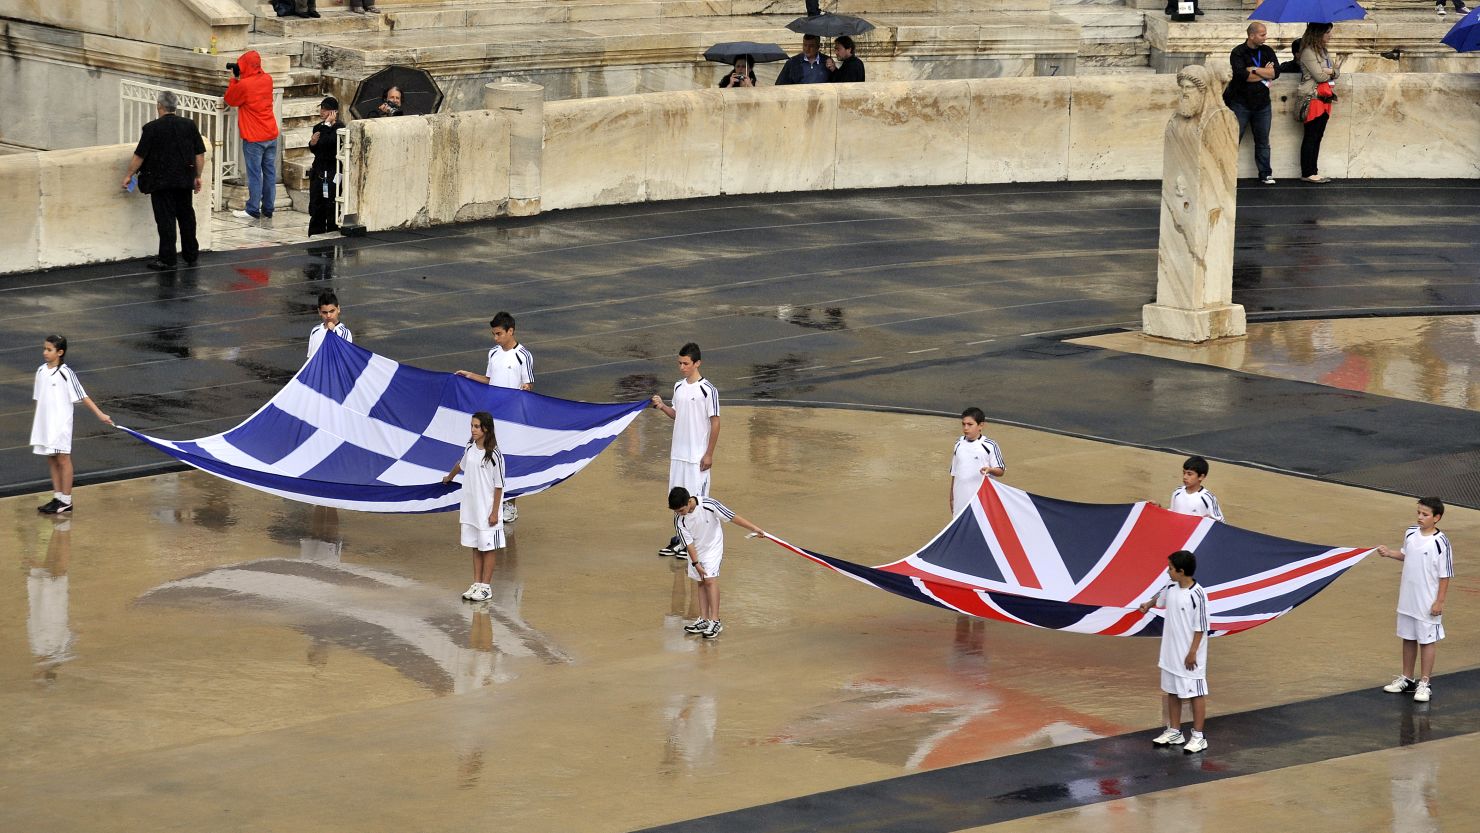 Children hold British and Greek flags during the handover ceremony for the 2012 London Olympics in Athens on Thursday.